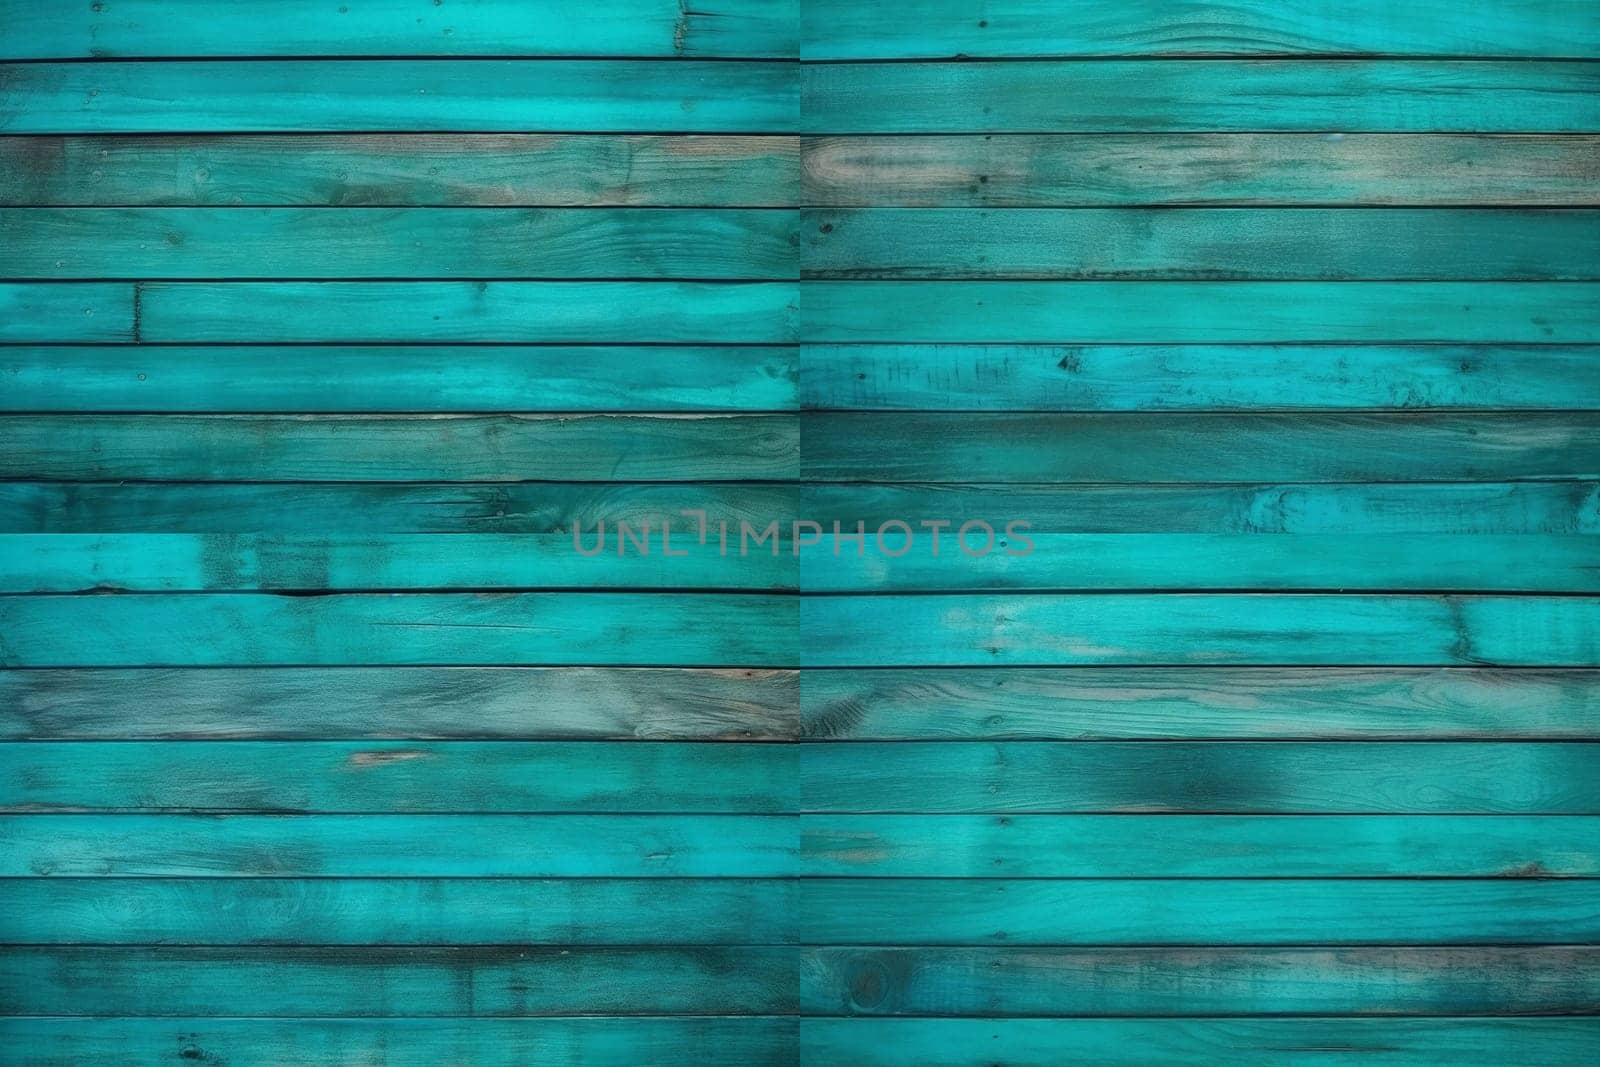 Blue Aqua color. Treated wooden boards - wood decking flooring and wood deck with paneled walls. Textures and patterns of natural wood. Background for interiors by Costin